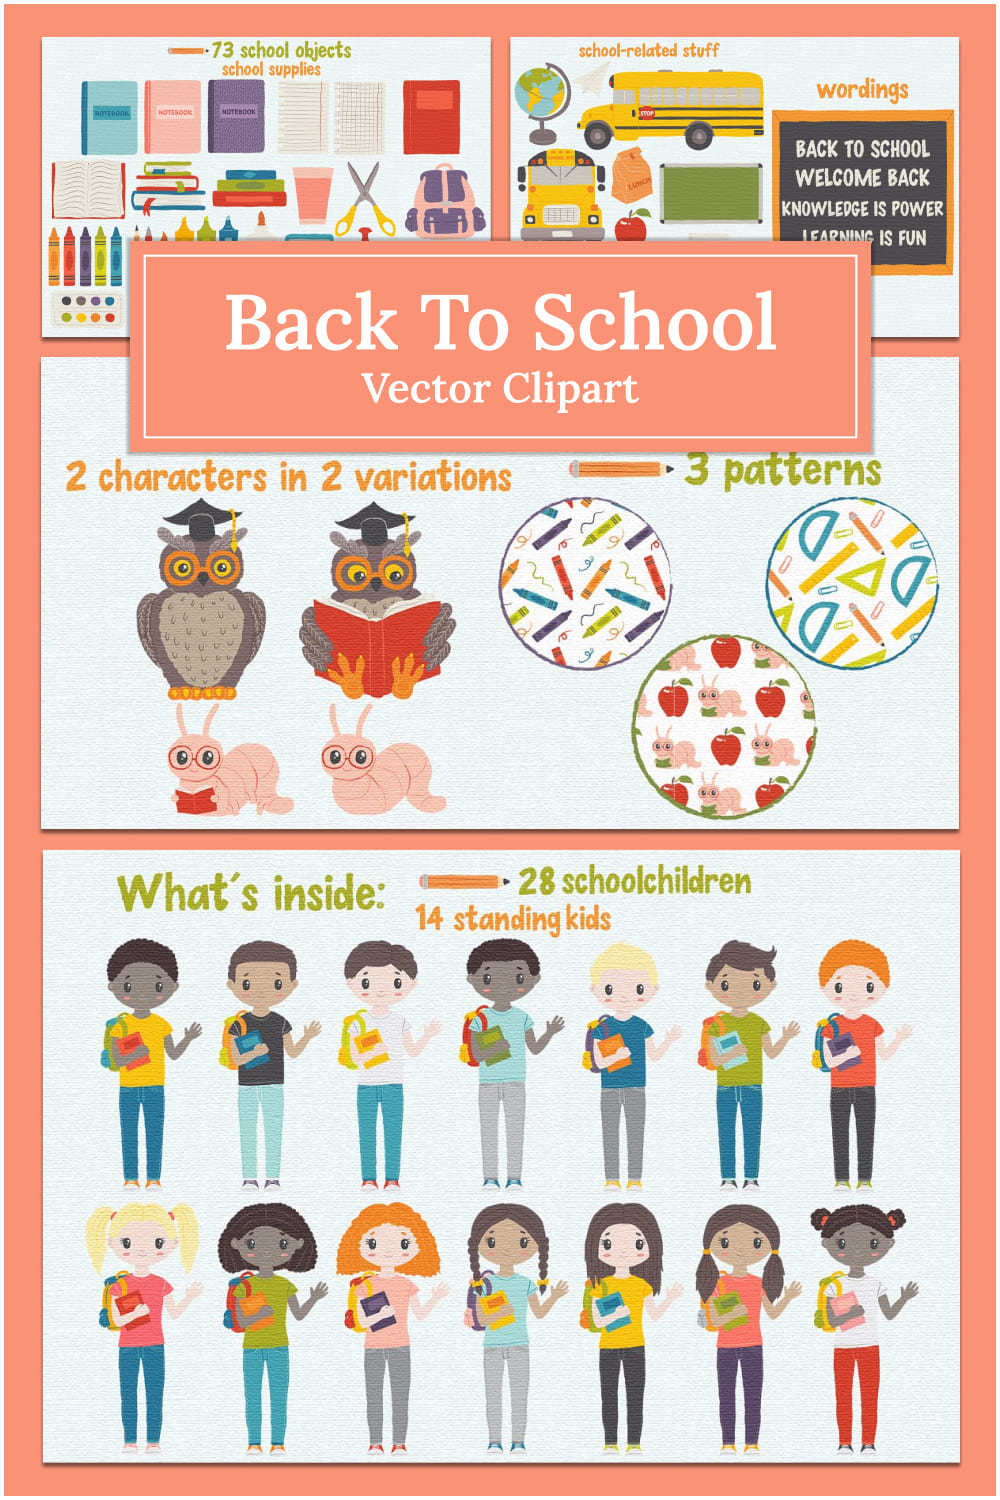 Back to school vector clipart - pinterest image preview.